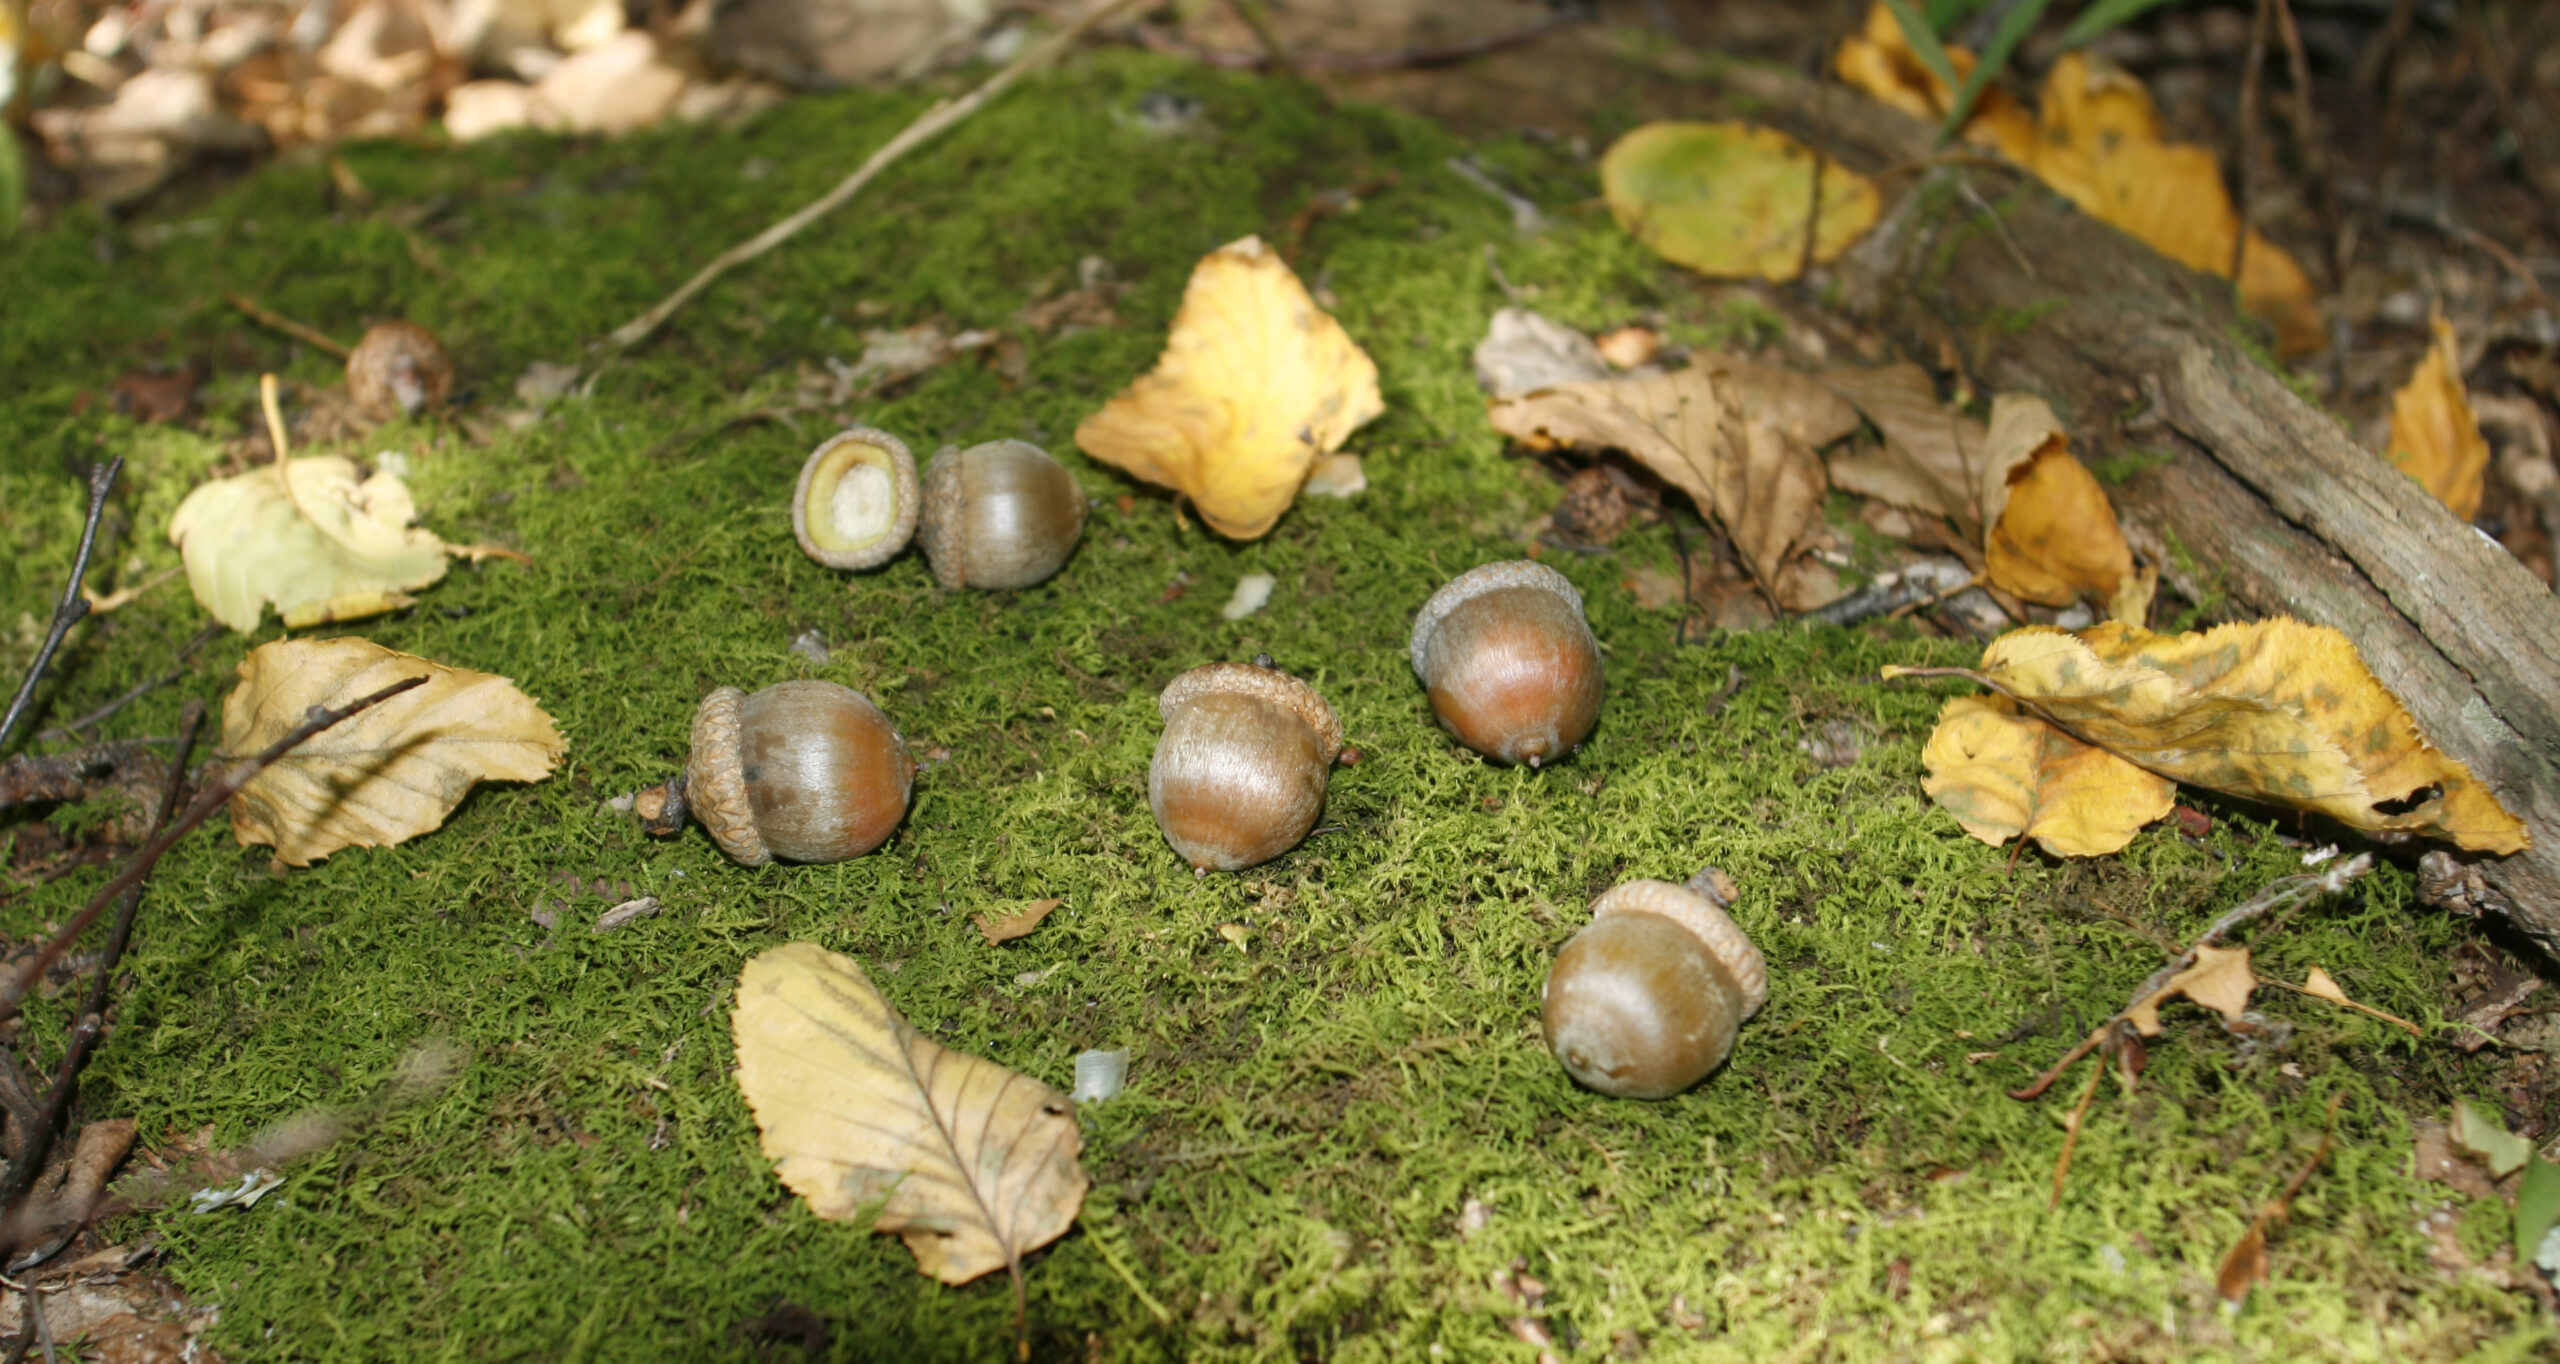 Five northern red oak acorns on a bed of moss with dried leaves.